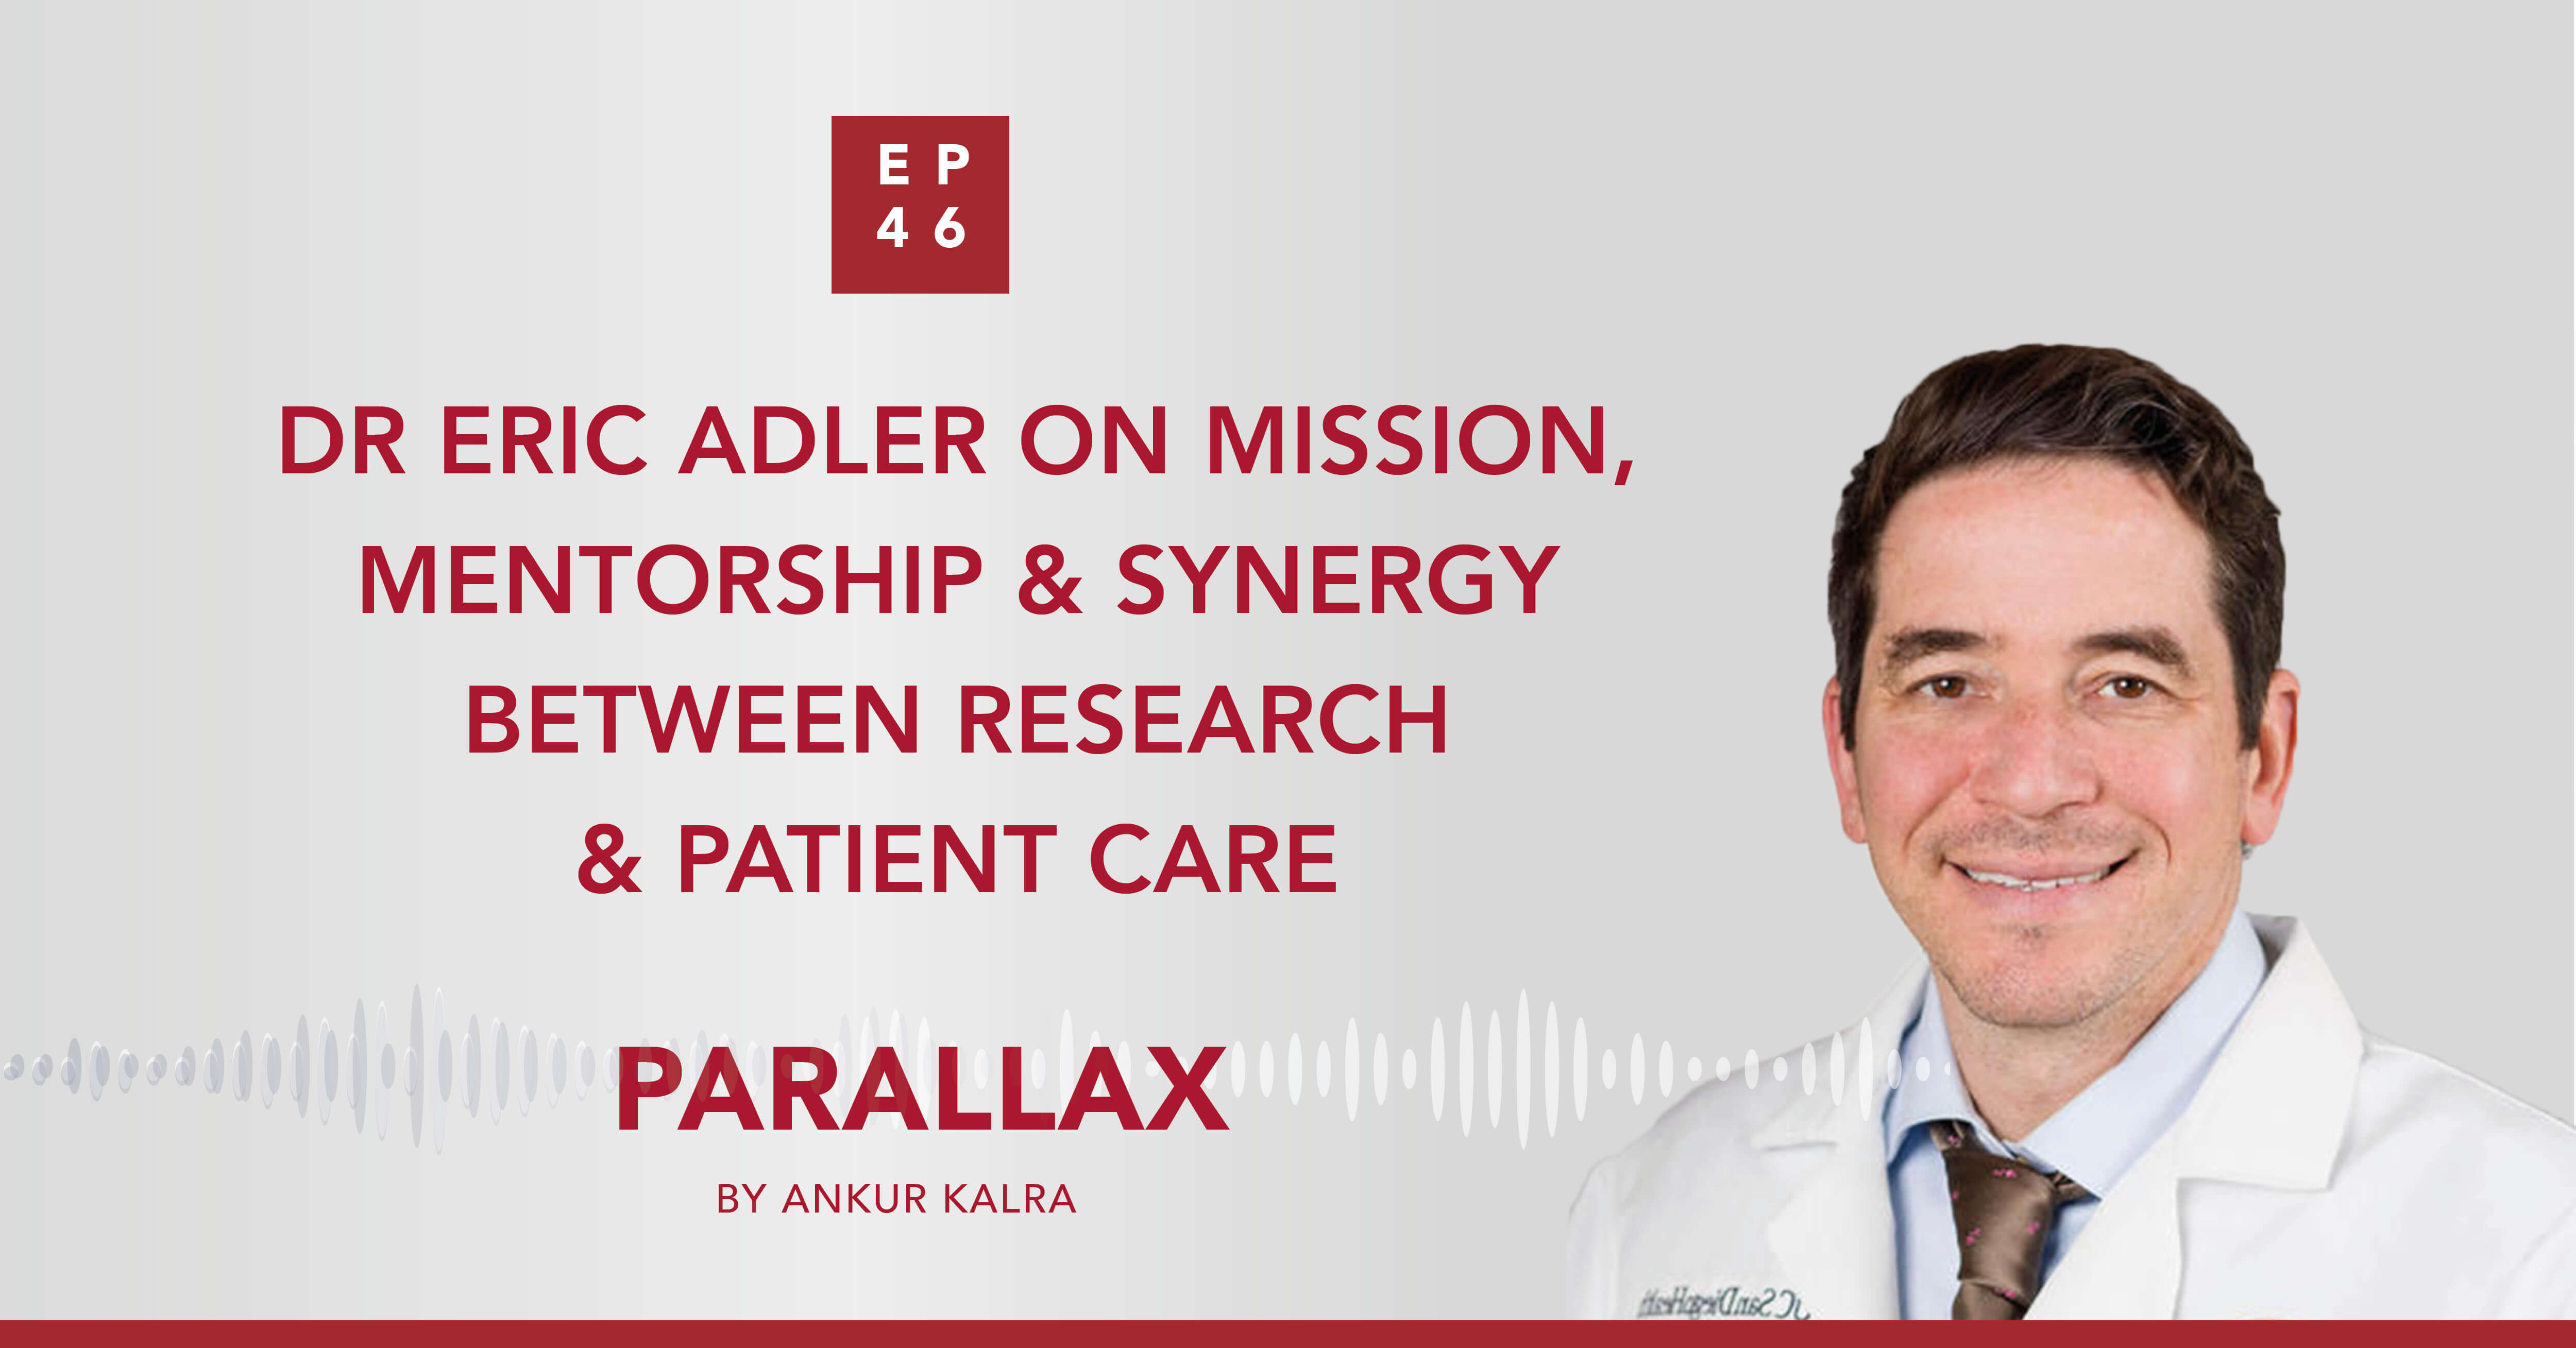 EP 46 Dr Eric Adler on Mission, Mentorship & Synergy Between Research & Patient Care